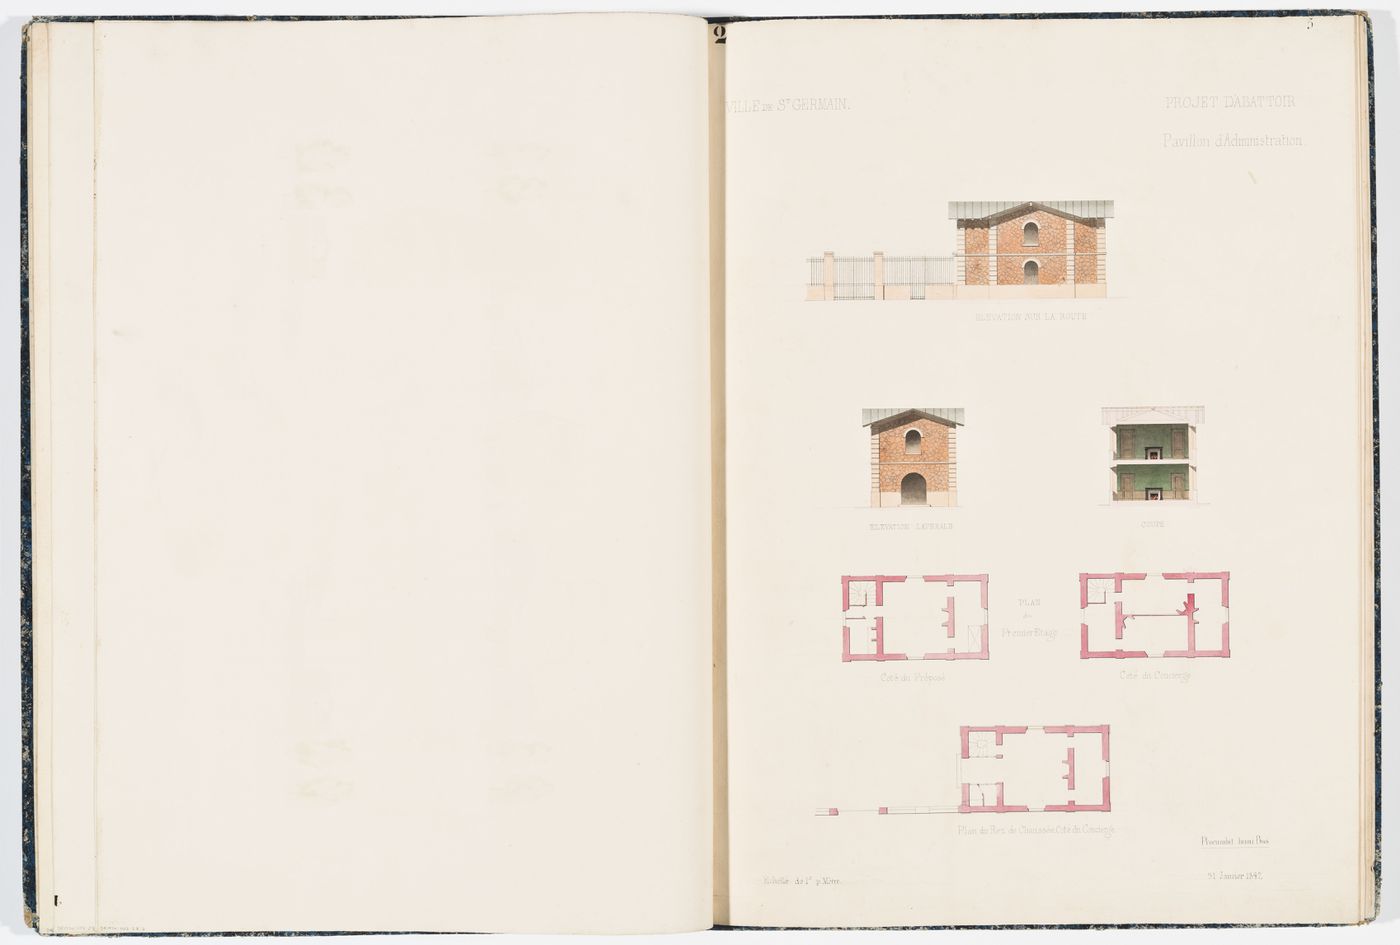 Front elevation, side elevation, and section for an administrative pavilion, plans for the first floor of the "bureau pour le préposé-receveur" and the "loge de concierge", and plan for the ground floor of the "loge de concierge"